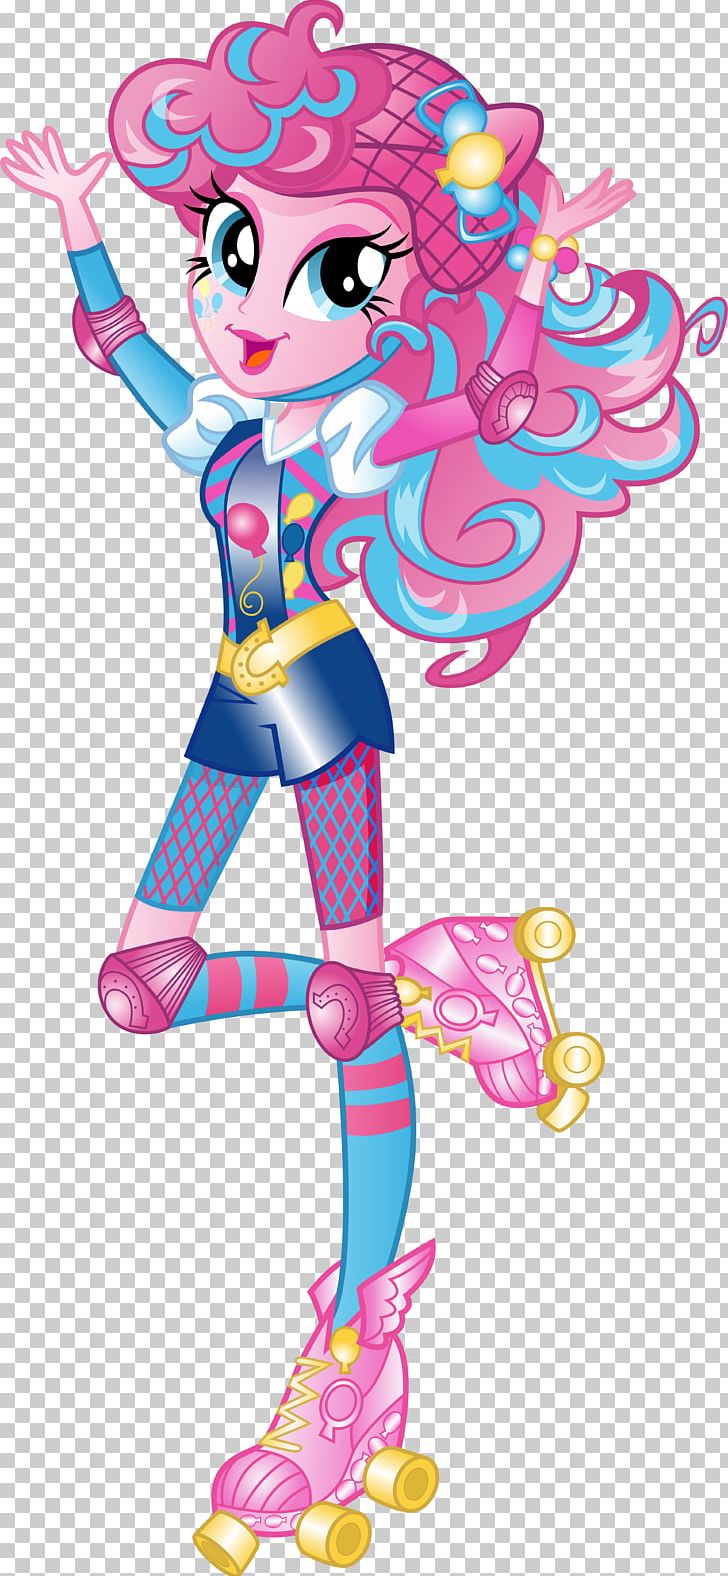 Pinkie Pie Rarity Rainbow Dash My Little Pony: Equestria Girls PNG, Clipart, Art, Cartoon, Equestria, Fictional Character, Magenta Free PNG Download